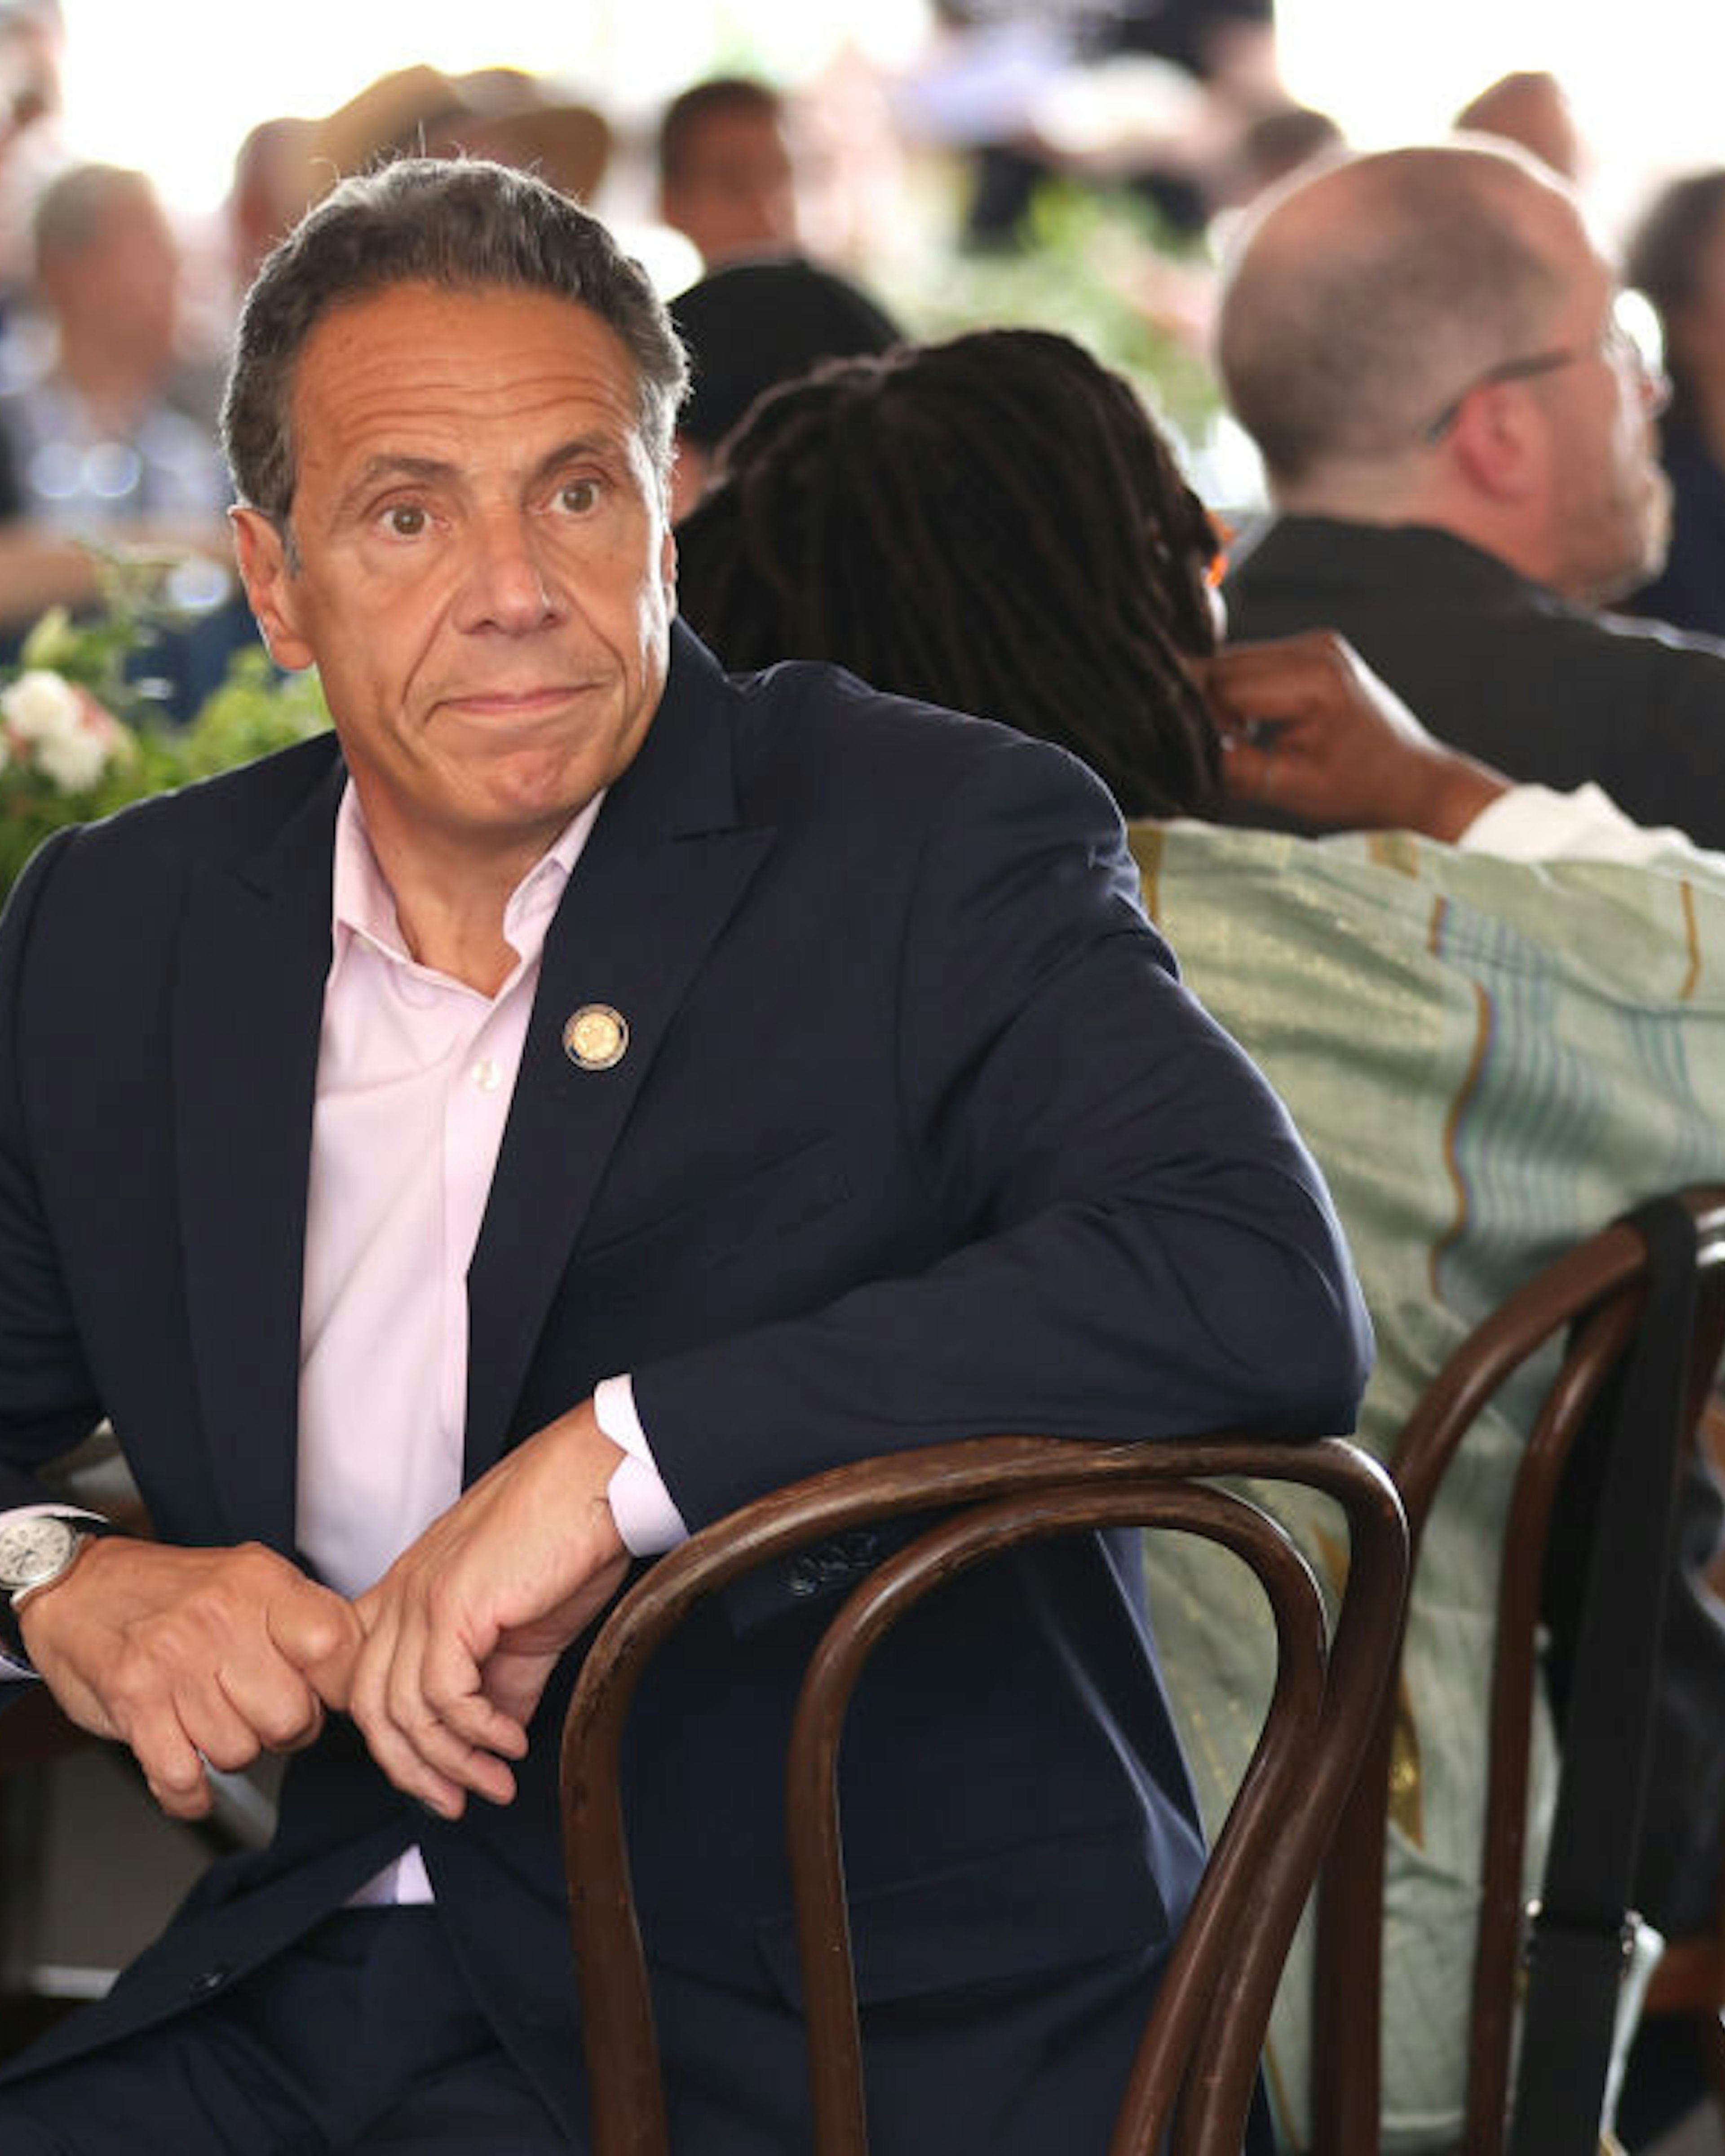 Governor of New York Andrew Cuomo attends the Tribeca Festival Welcome Lunch during the 2021 Tribeca Festival at Pier 76 on June 09, 2021 in New York City.